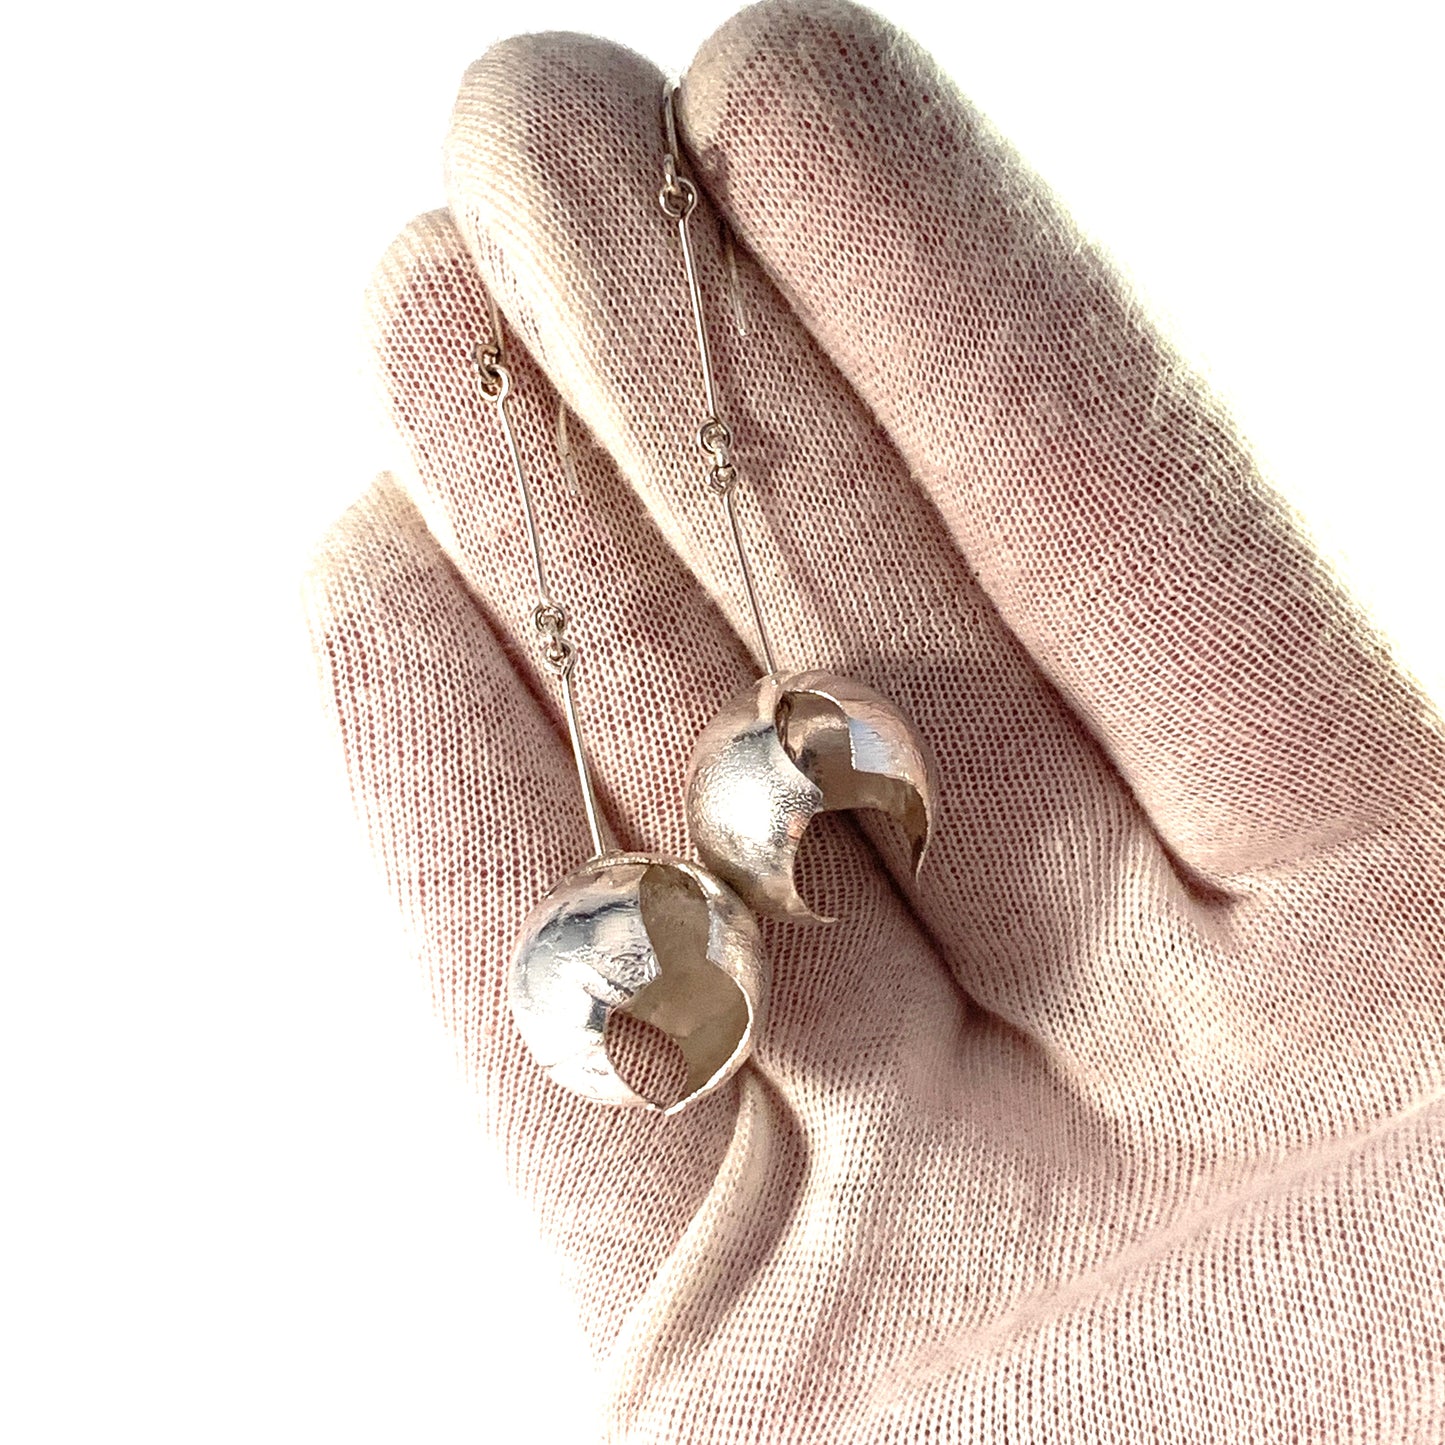 Vintage Large Sterling Silver Cultured Pearl Dangle Earrings. Probably Finland.